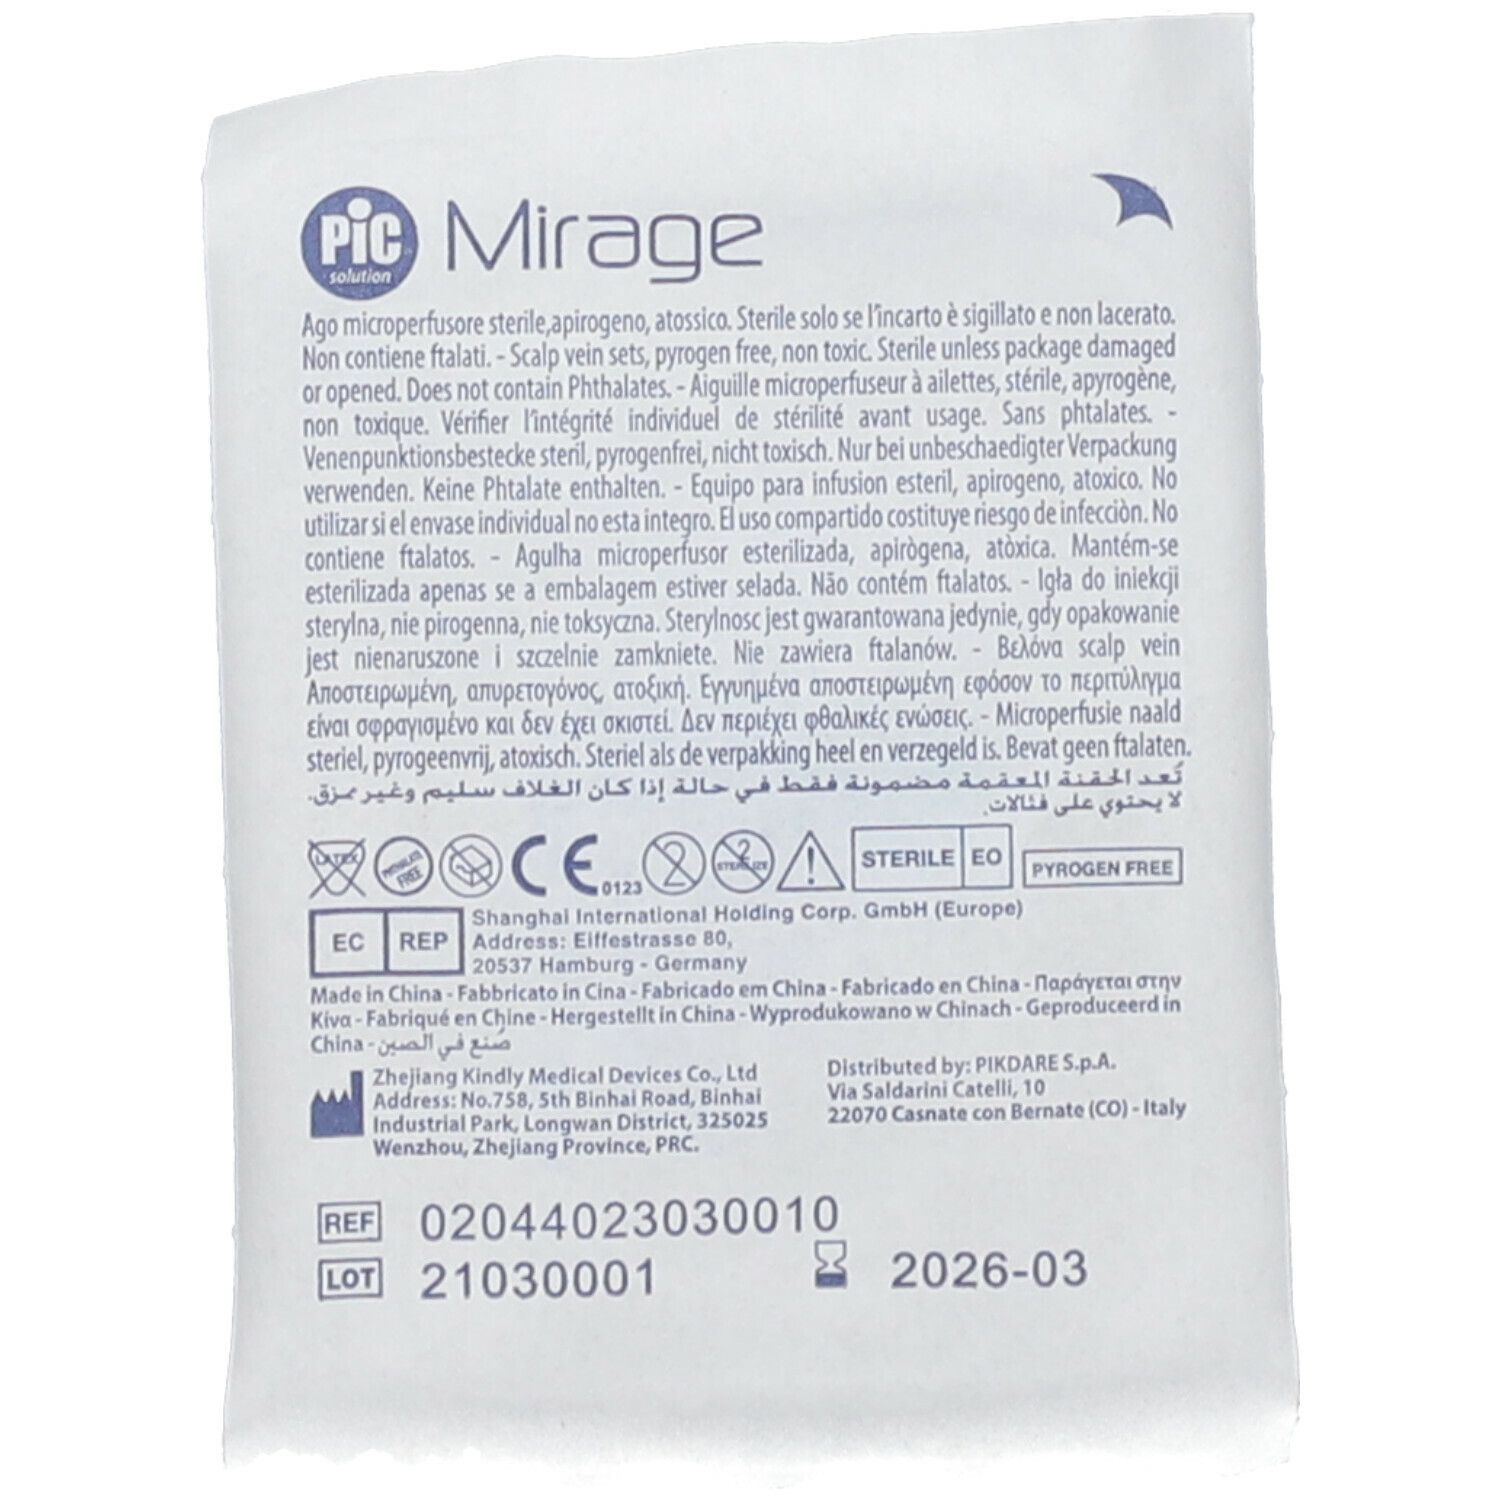 Pic Mirage Ago Microperfusore 23G